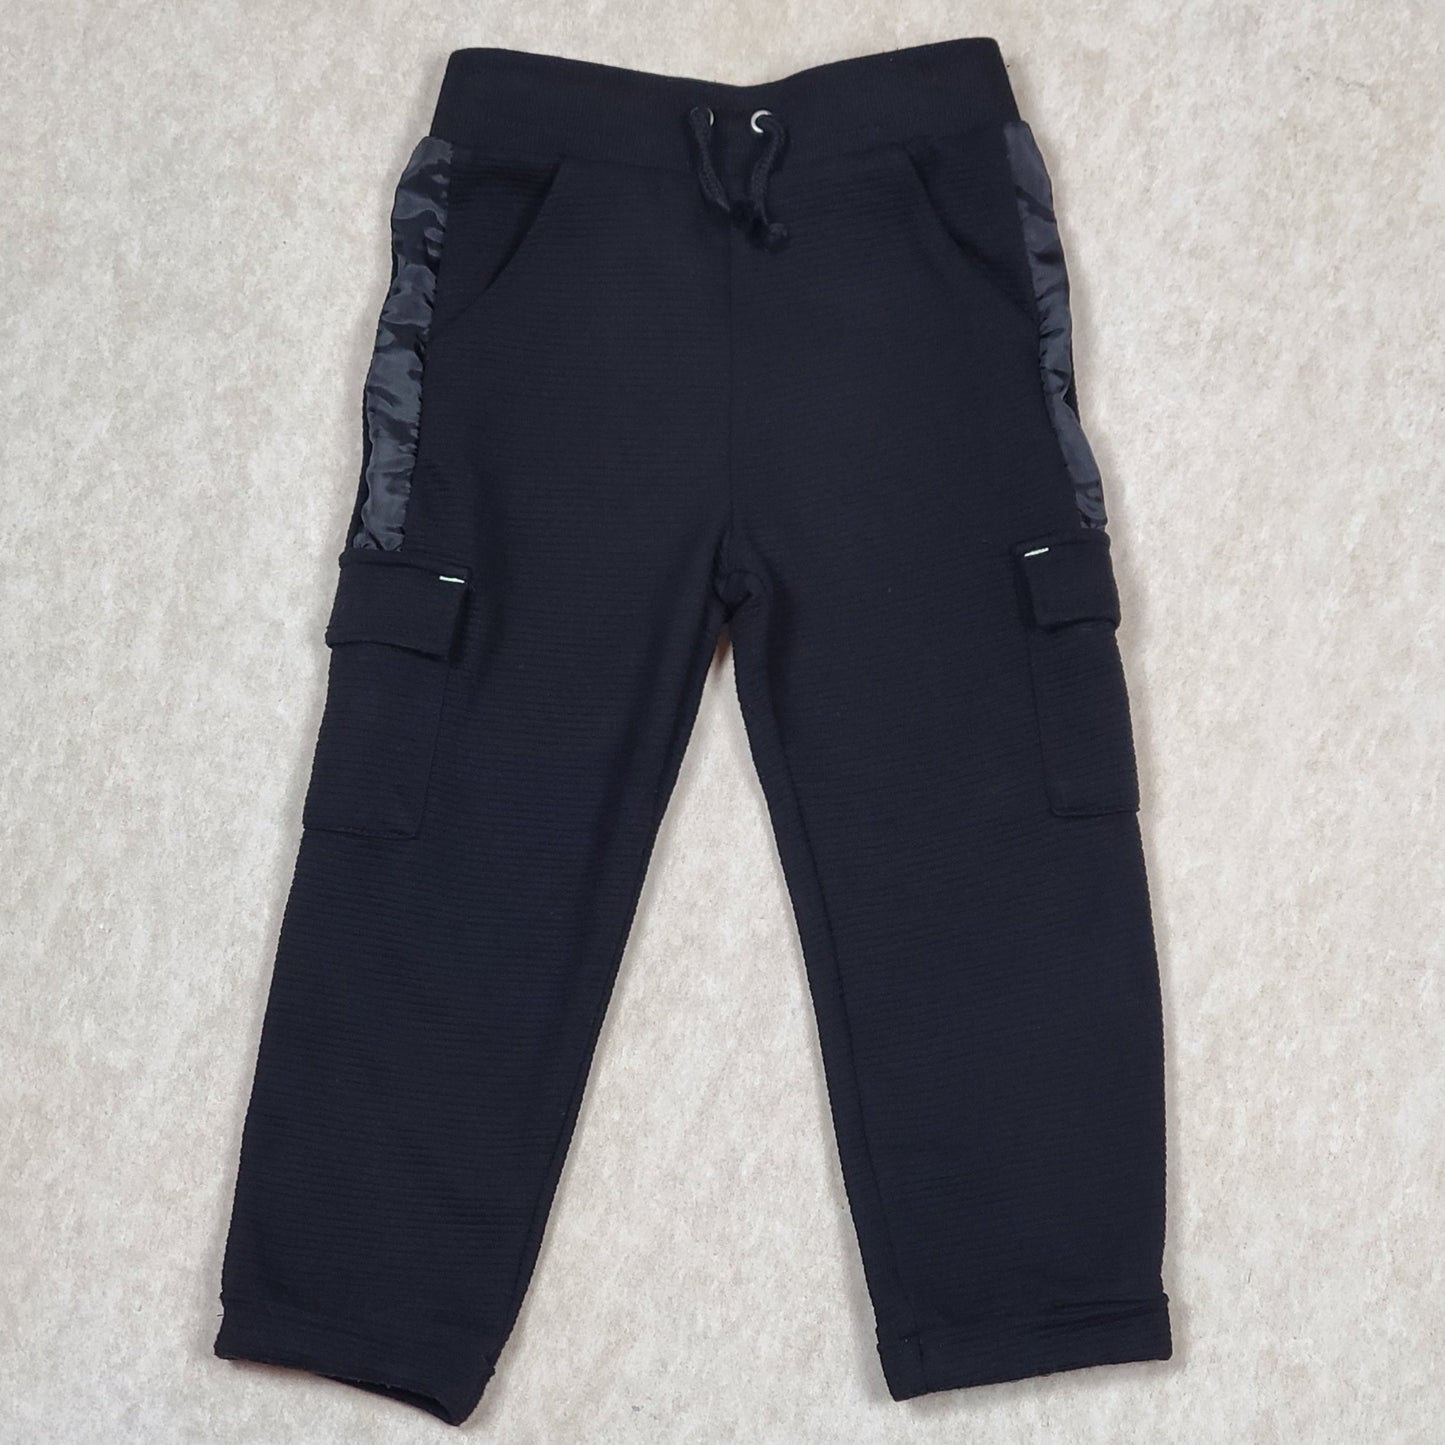 Cat Jack Boys Black Knit Cargo Pants 4T Used View 1